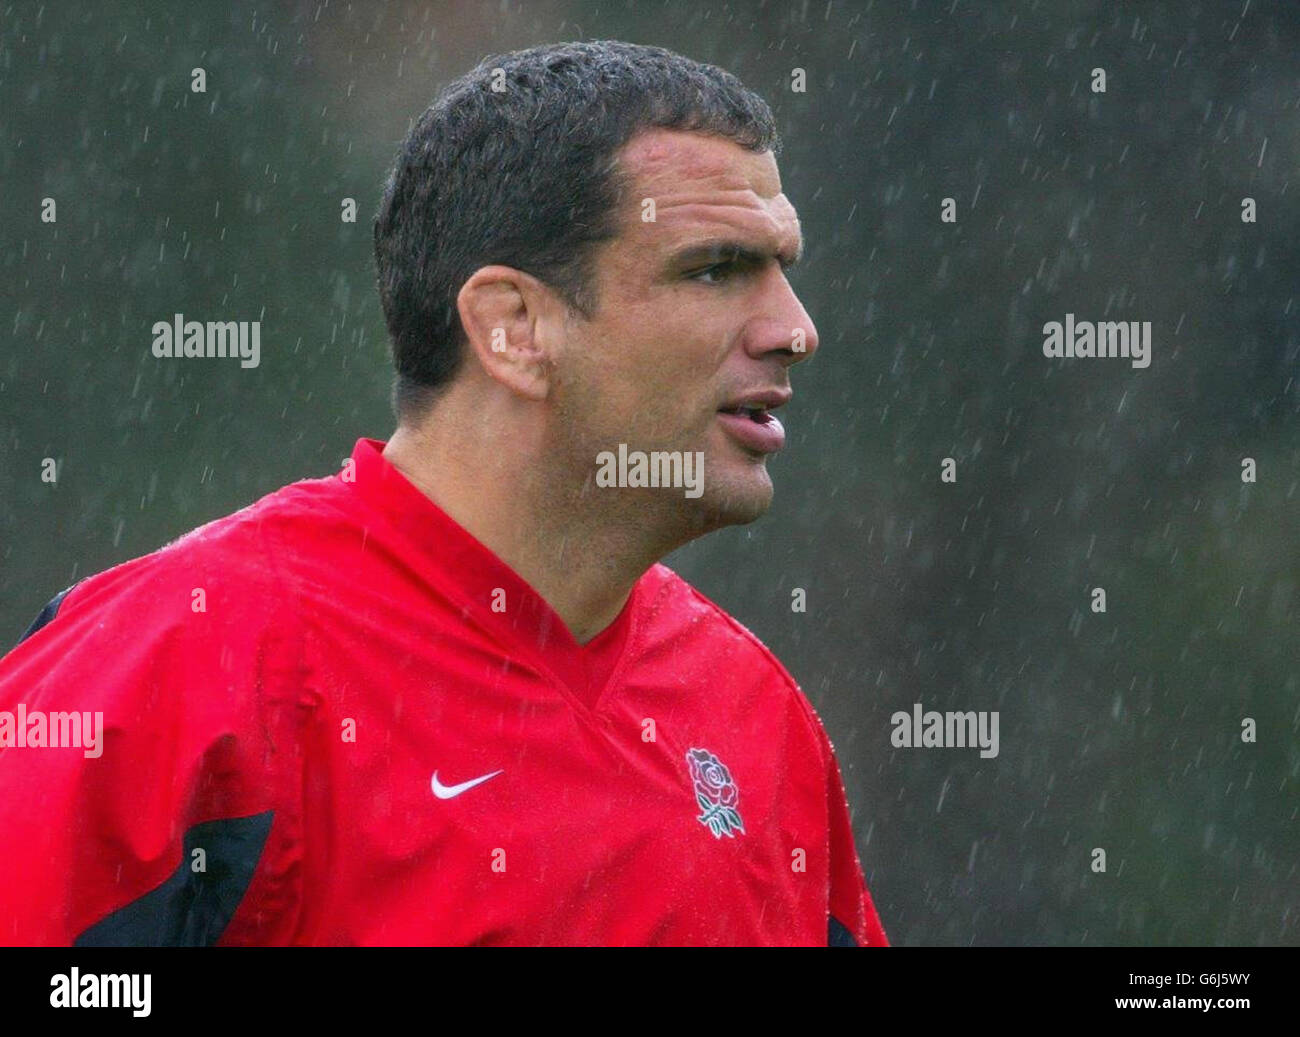 England captain Martin Johnson in training, at the Scotch College in Melbourne, Australia, ahead of their Pool C match against Samoa on Sunday. NO MOBILE PHONE USAGE. INTERNET SITES MAY ONY USE ONE IMAGE EVERY FIVE MINUTES DURING MATCH. Stock Photo